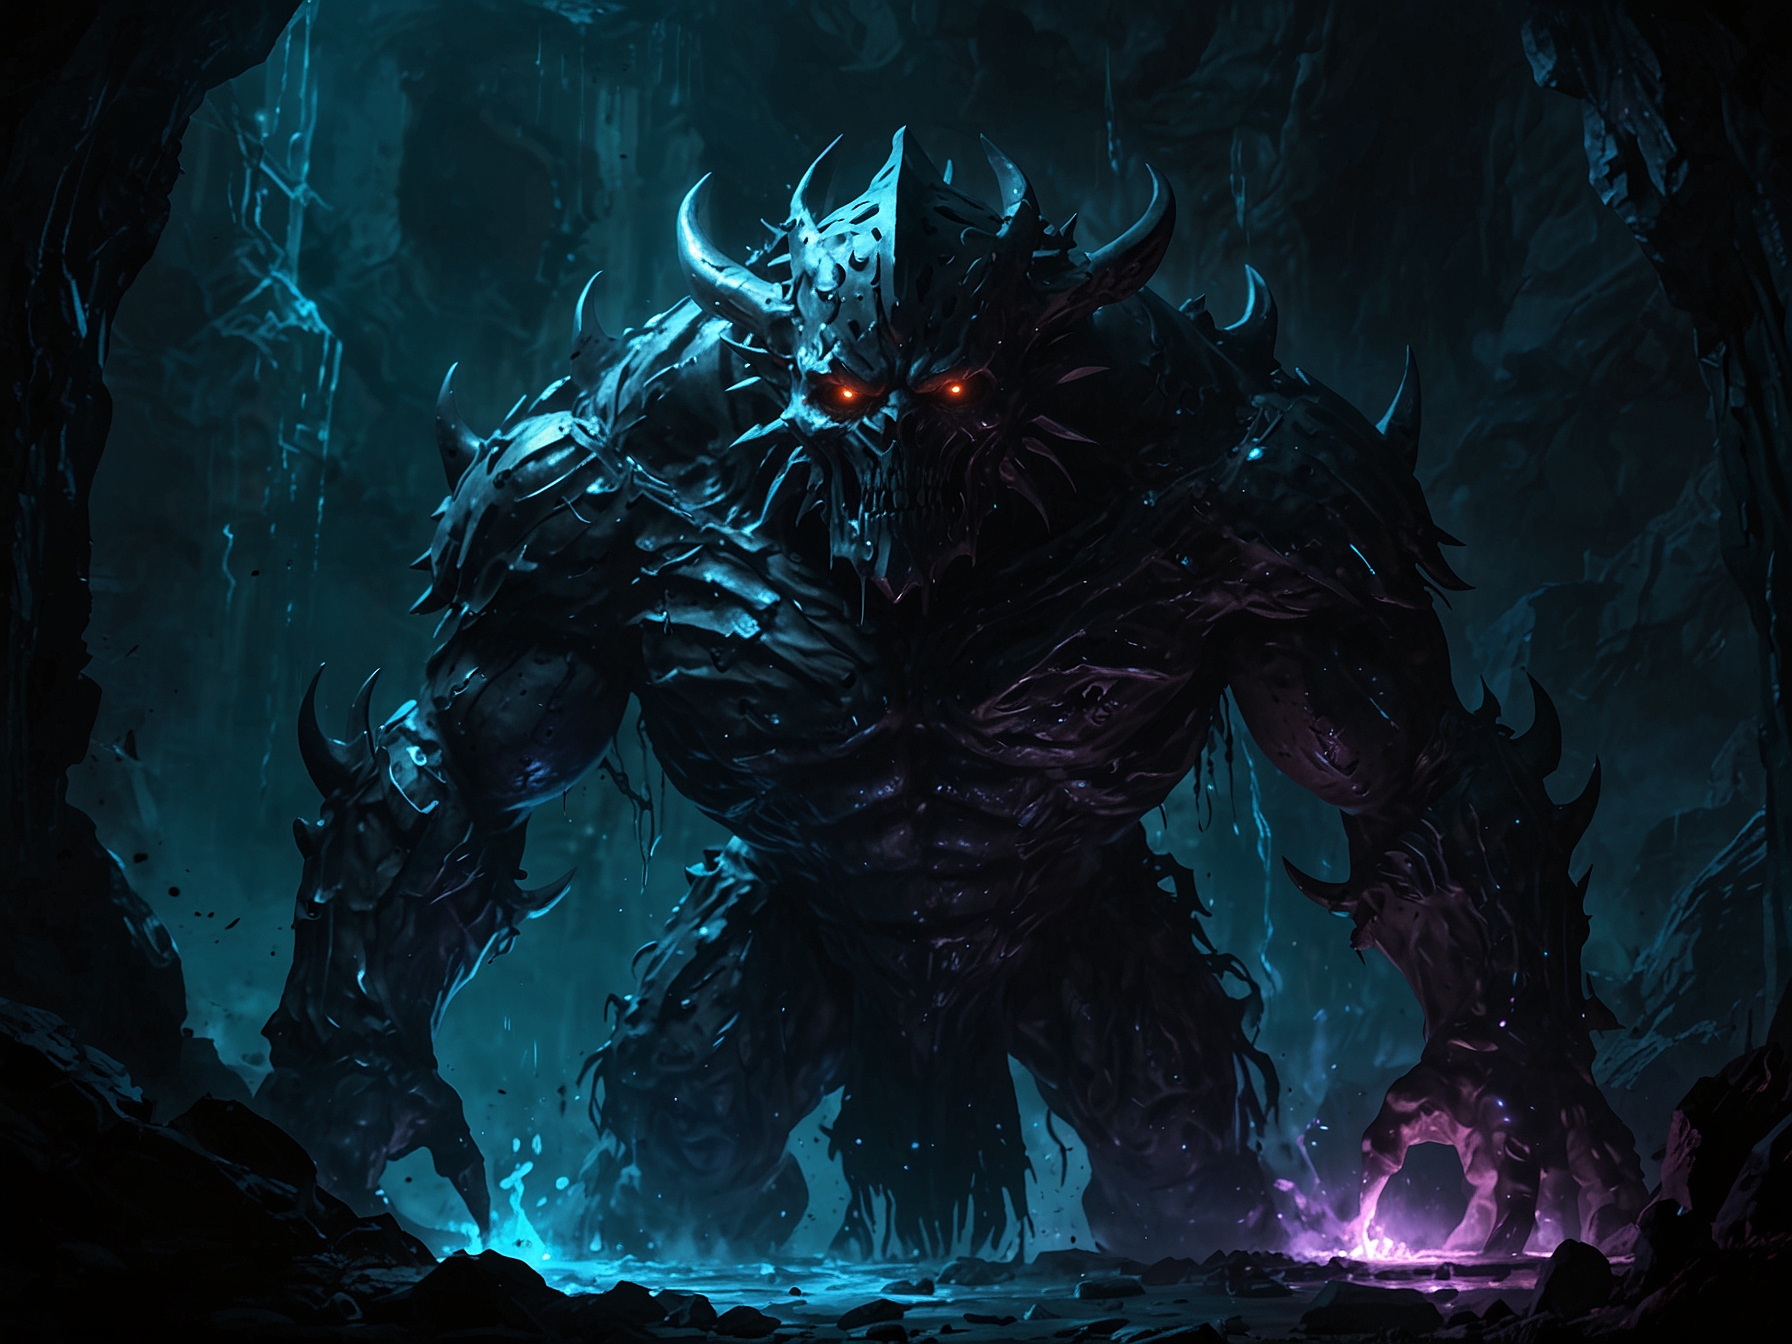 Facing the Abyssal Warden boss inside the Elden Well's bioluminescent cavern, the player must use agility and strength to defeat this formidable guardian and uncover ancient secrets.